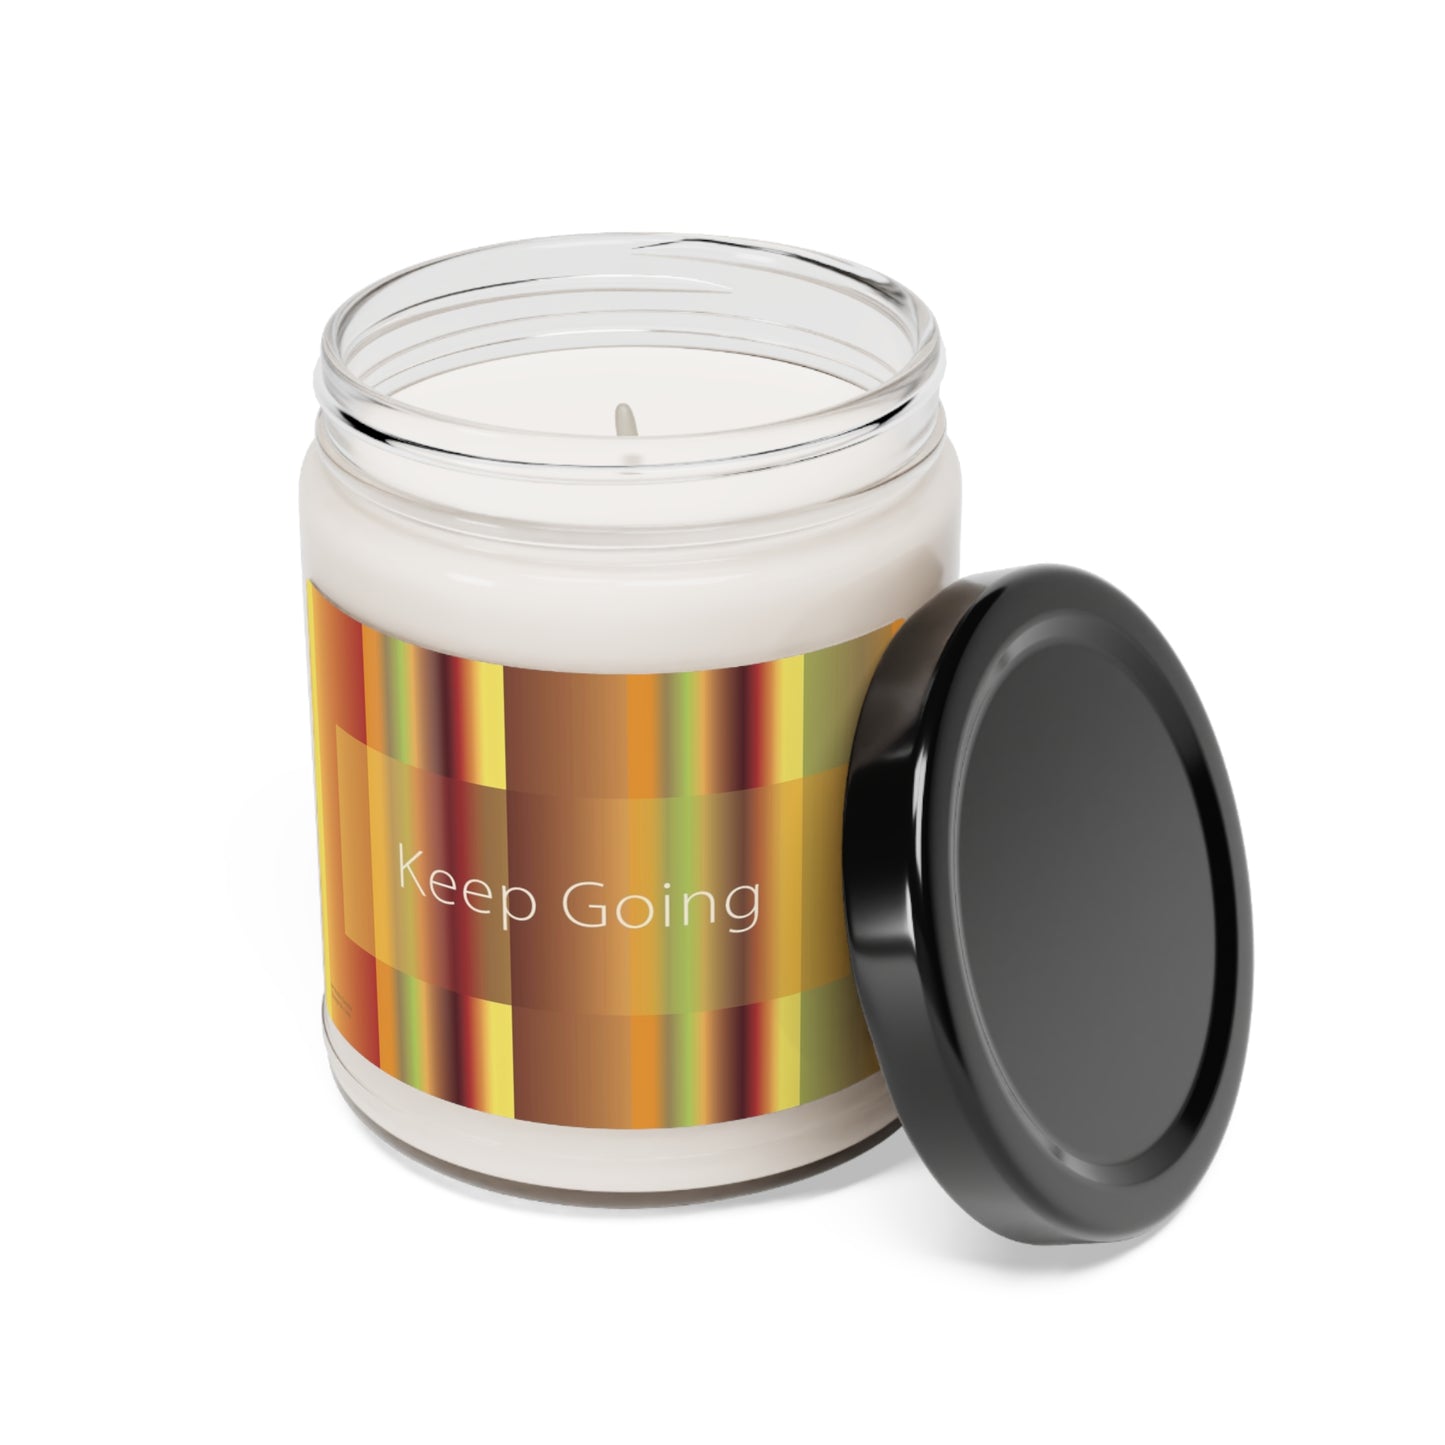 Scented Soy Candle, 9oz Keep Going - Design No.1200